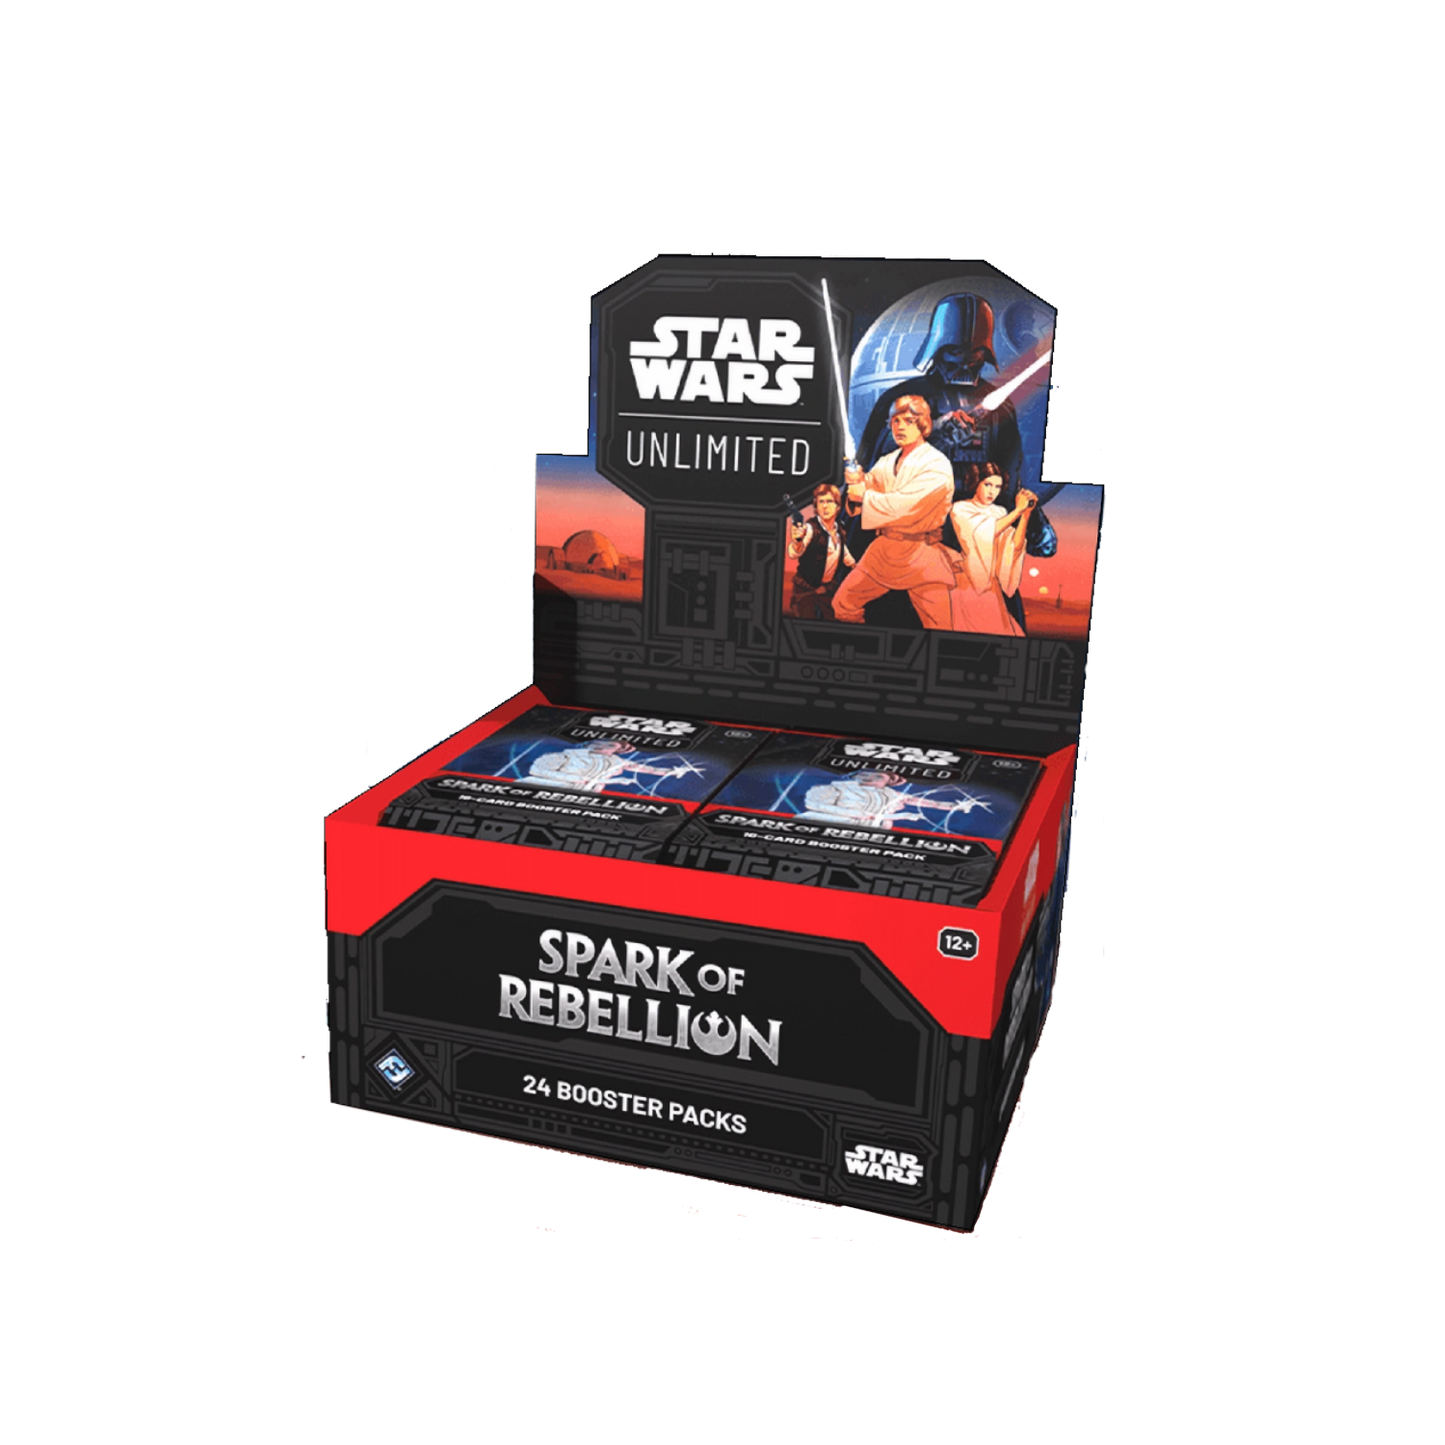 Star Wars: Unlimited Spark of Rebellion Booster Box (24 Packs)